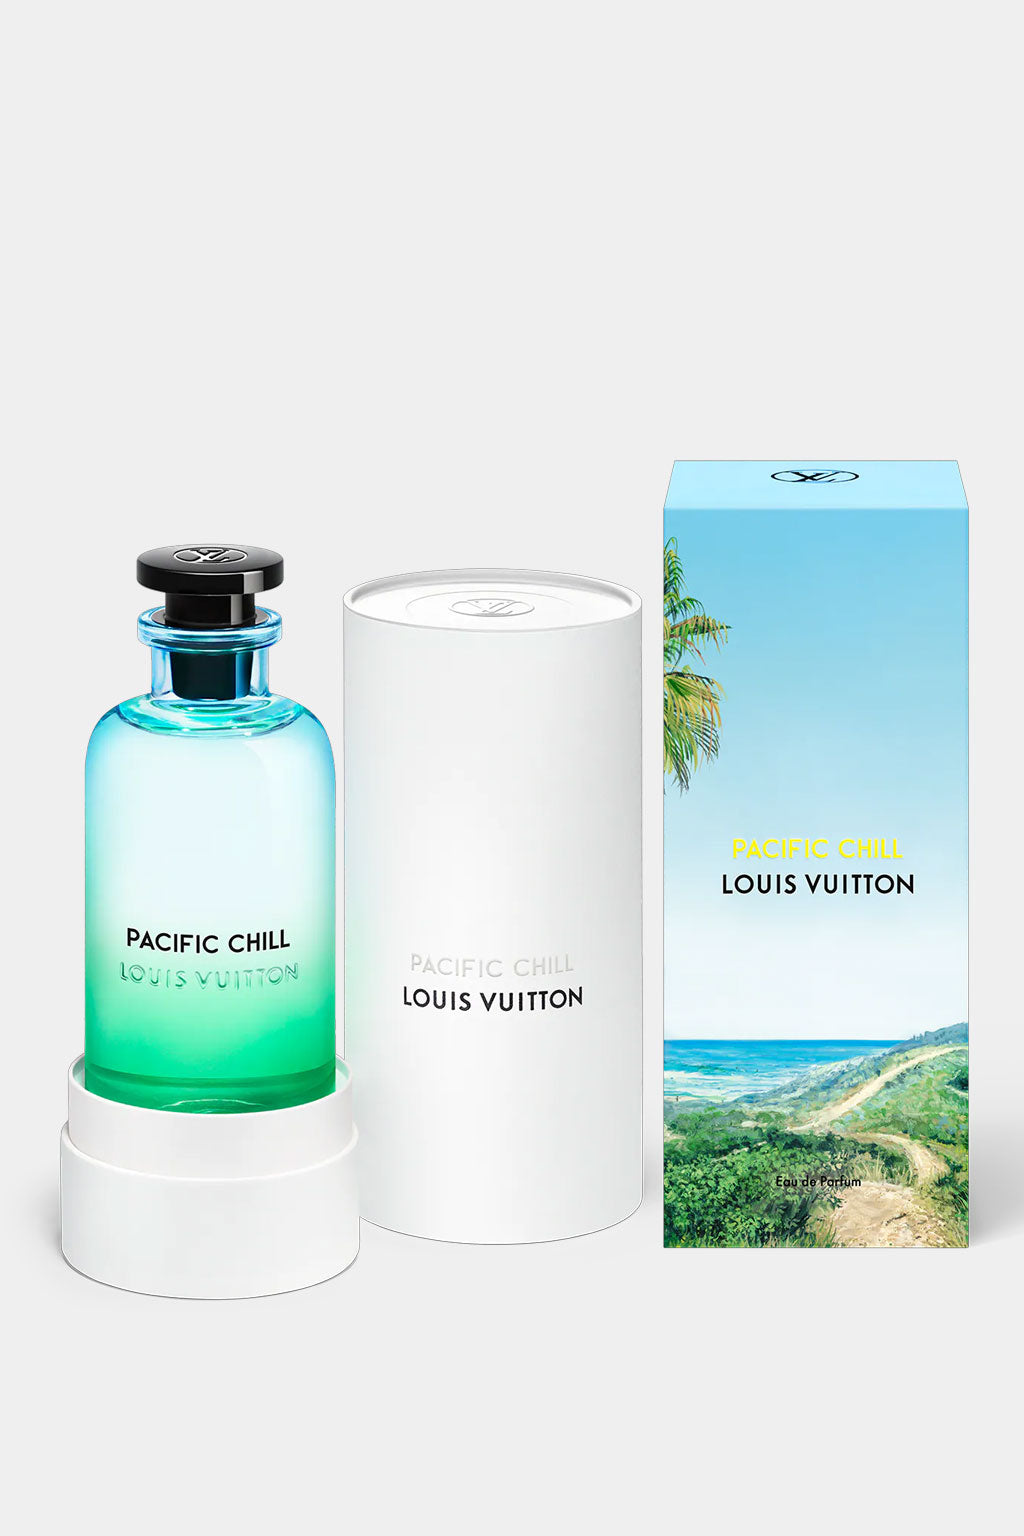 Pacific Chill Louis Vuitton perfume - a fragrance for women and